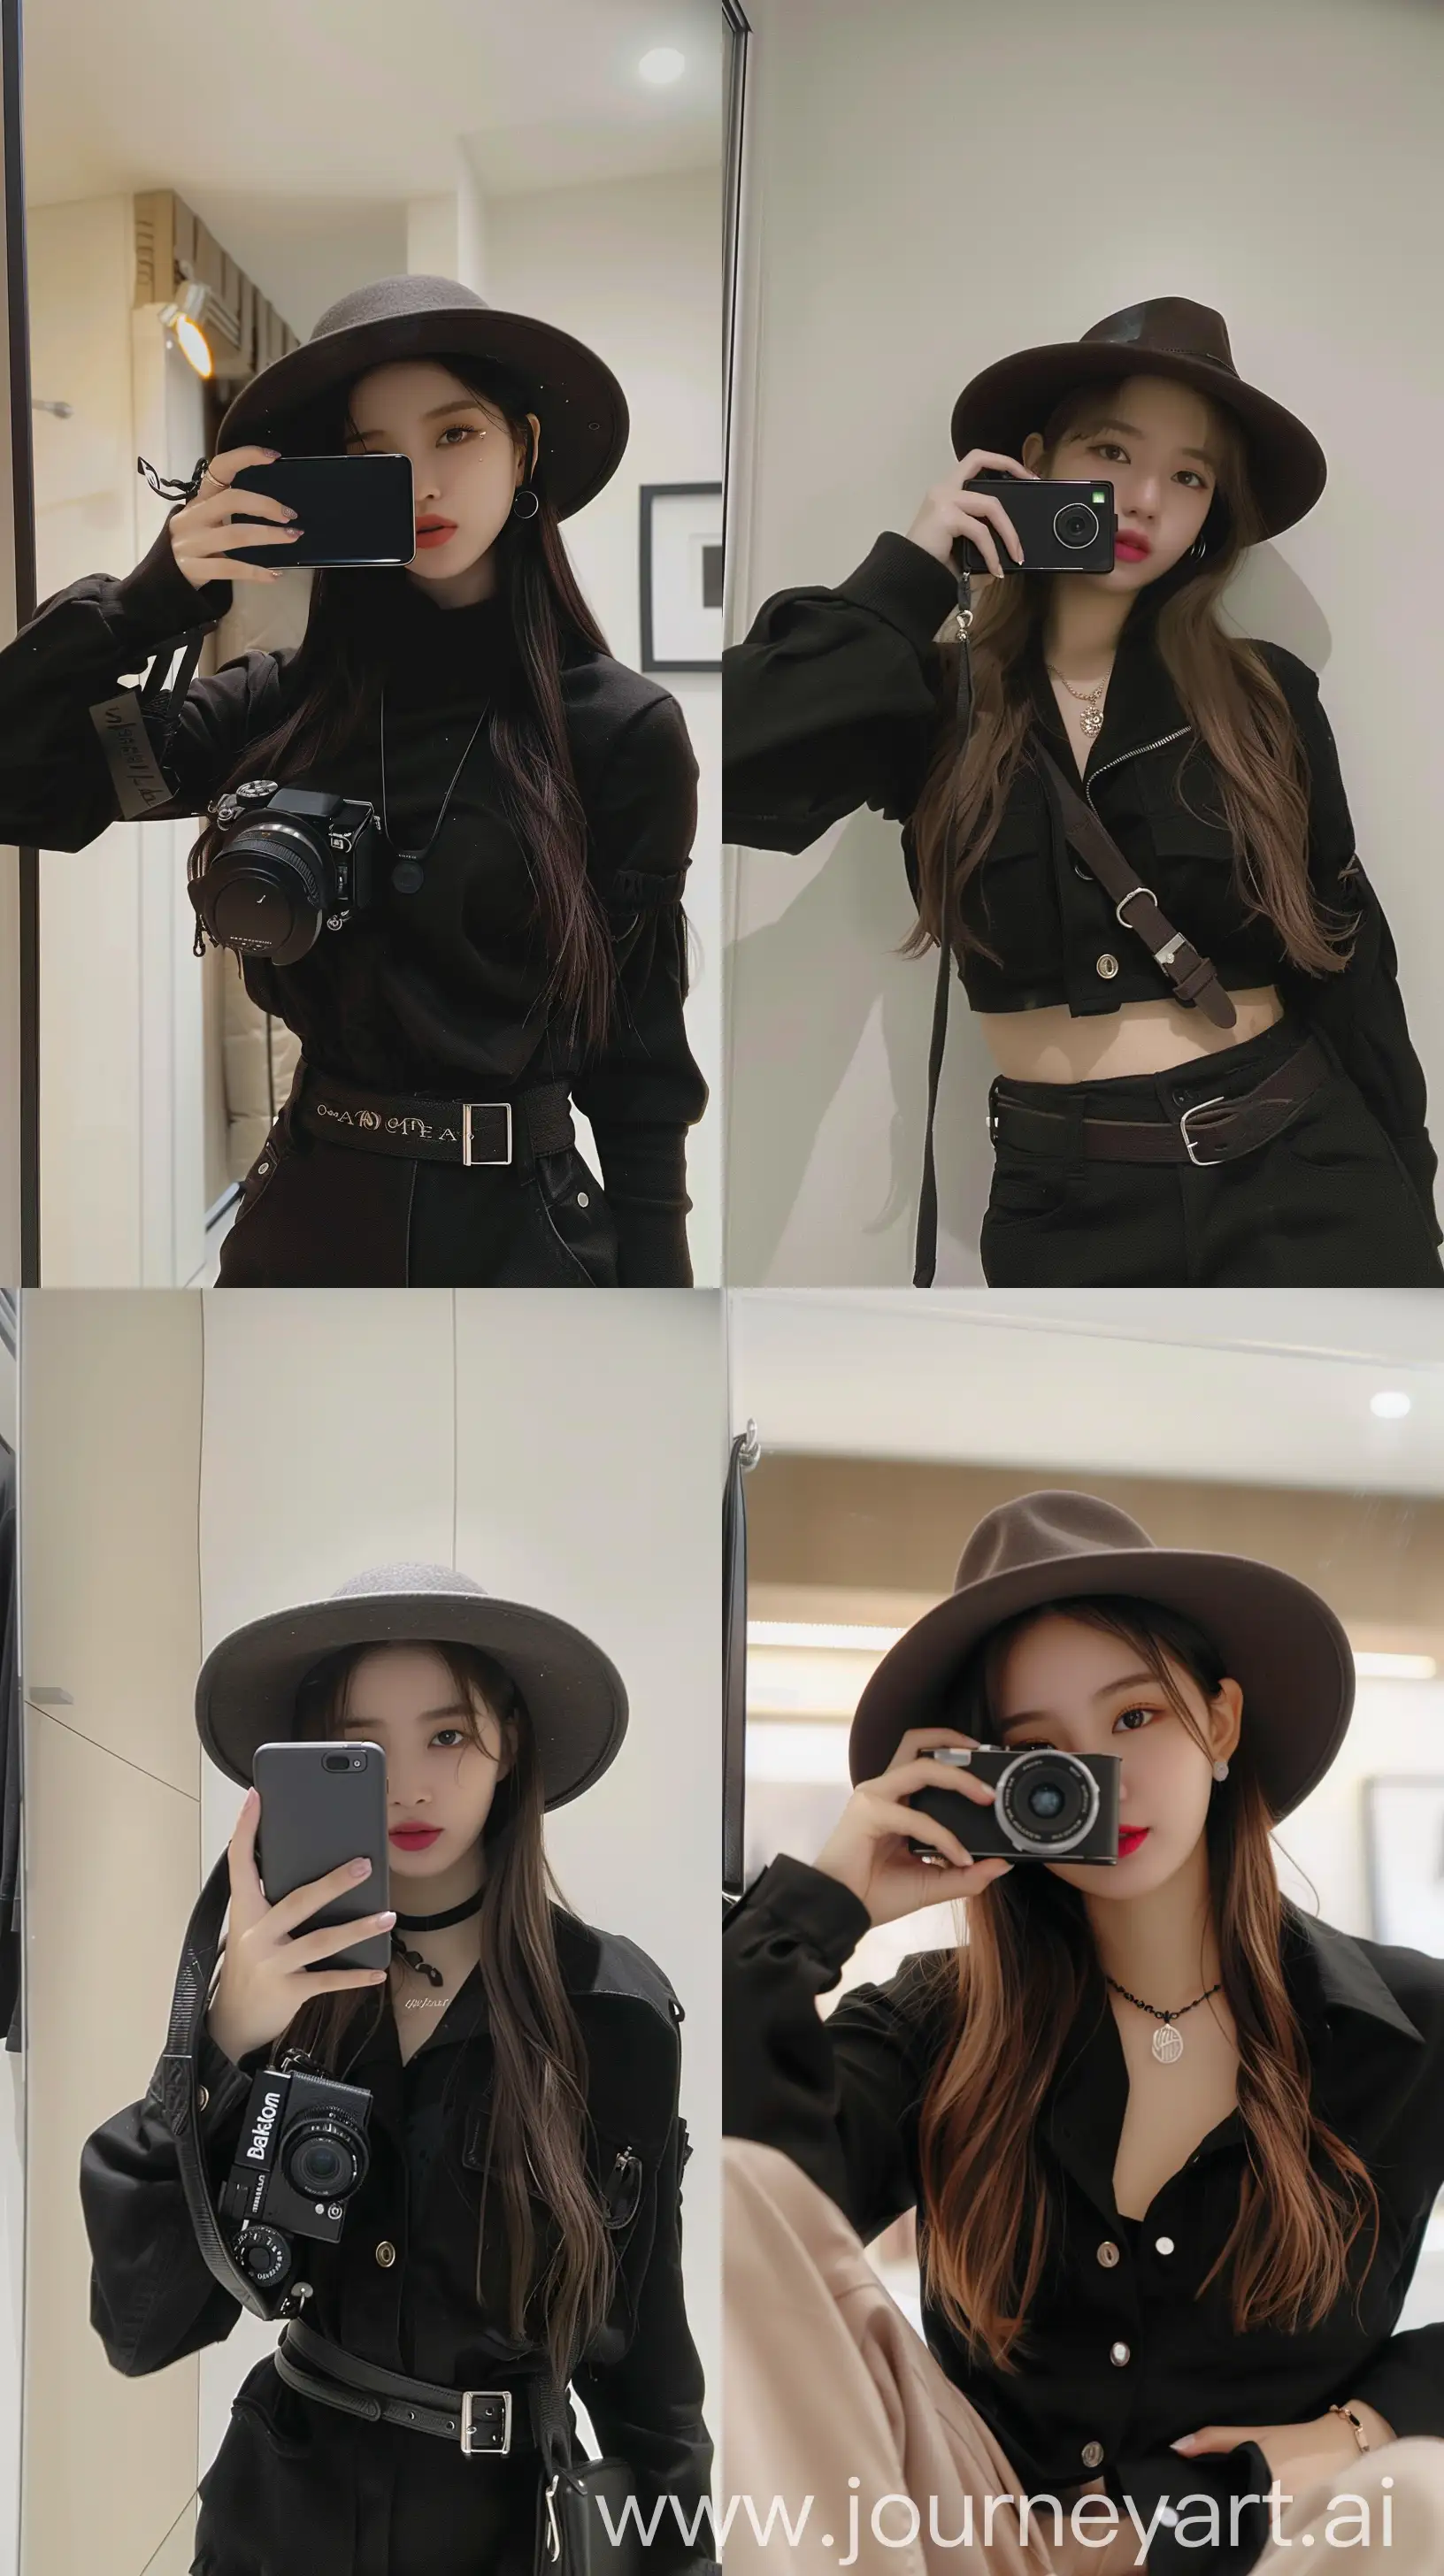 a blackpink's jennie,aestethic mirror selfie with a camera, wearing cute black clothes, flat hat, aestethic make up --ar 9:16